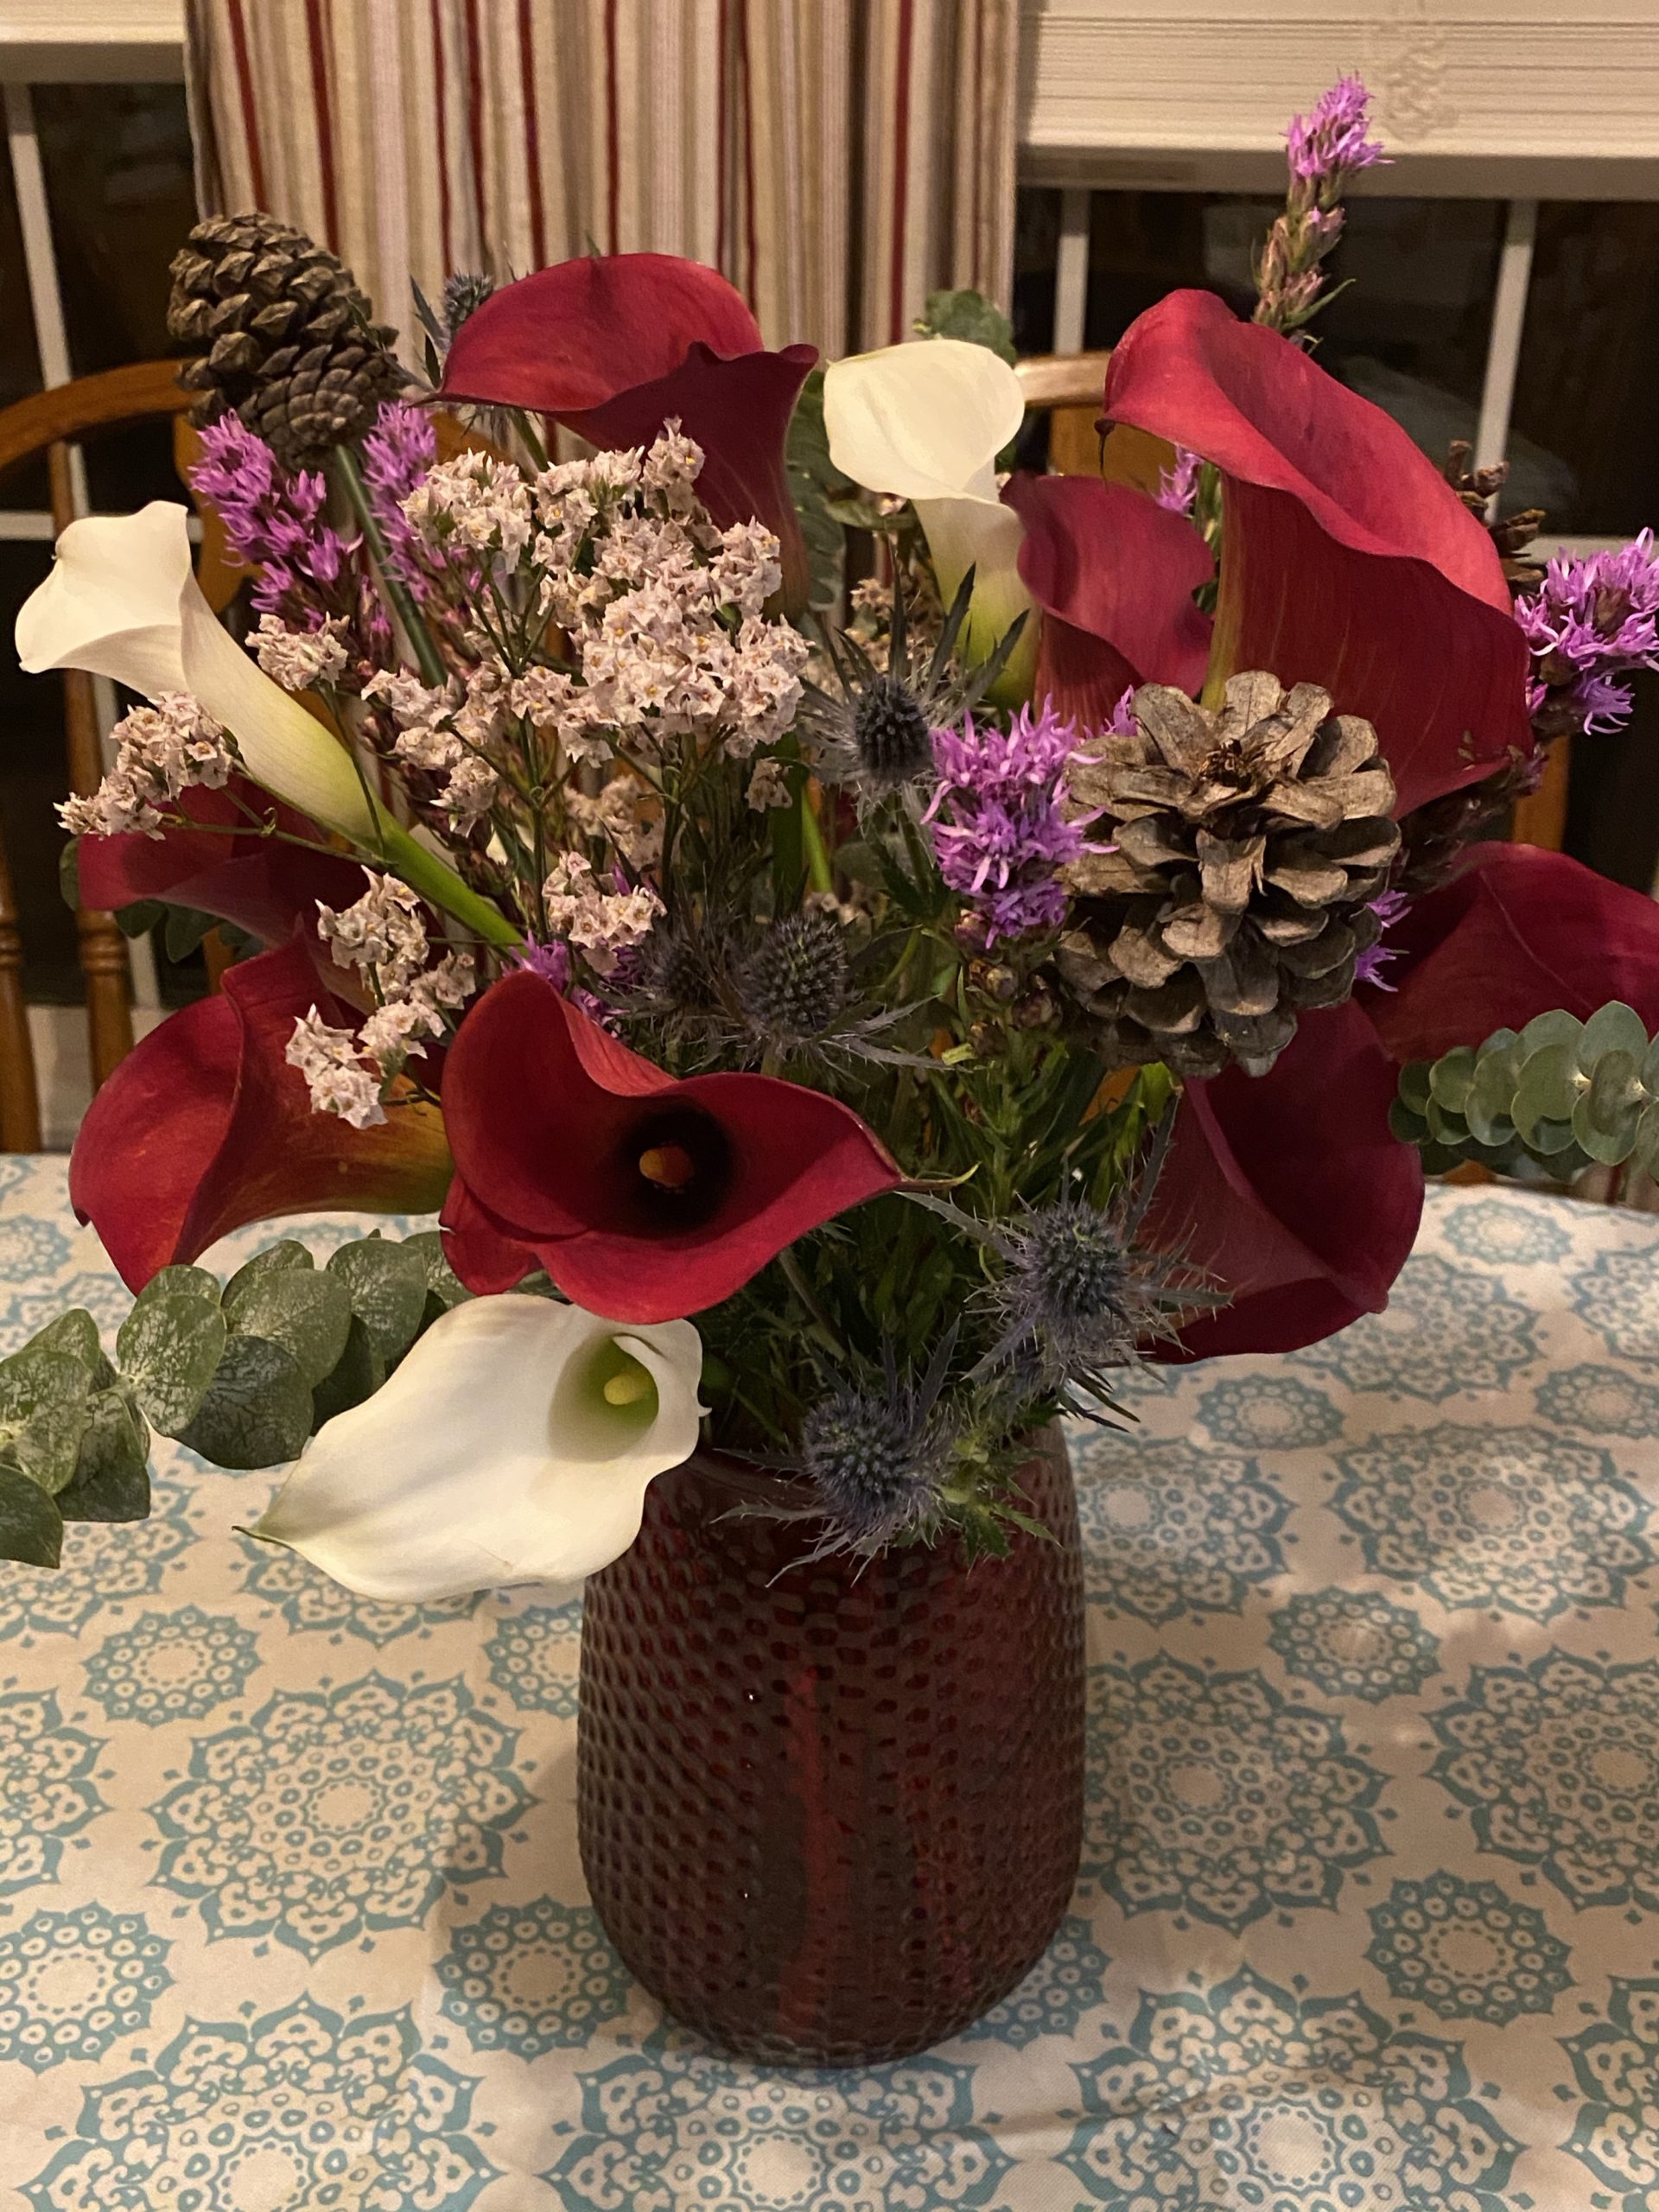 BloomsyBox November 2020 Flower Subscription Box Review